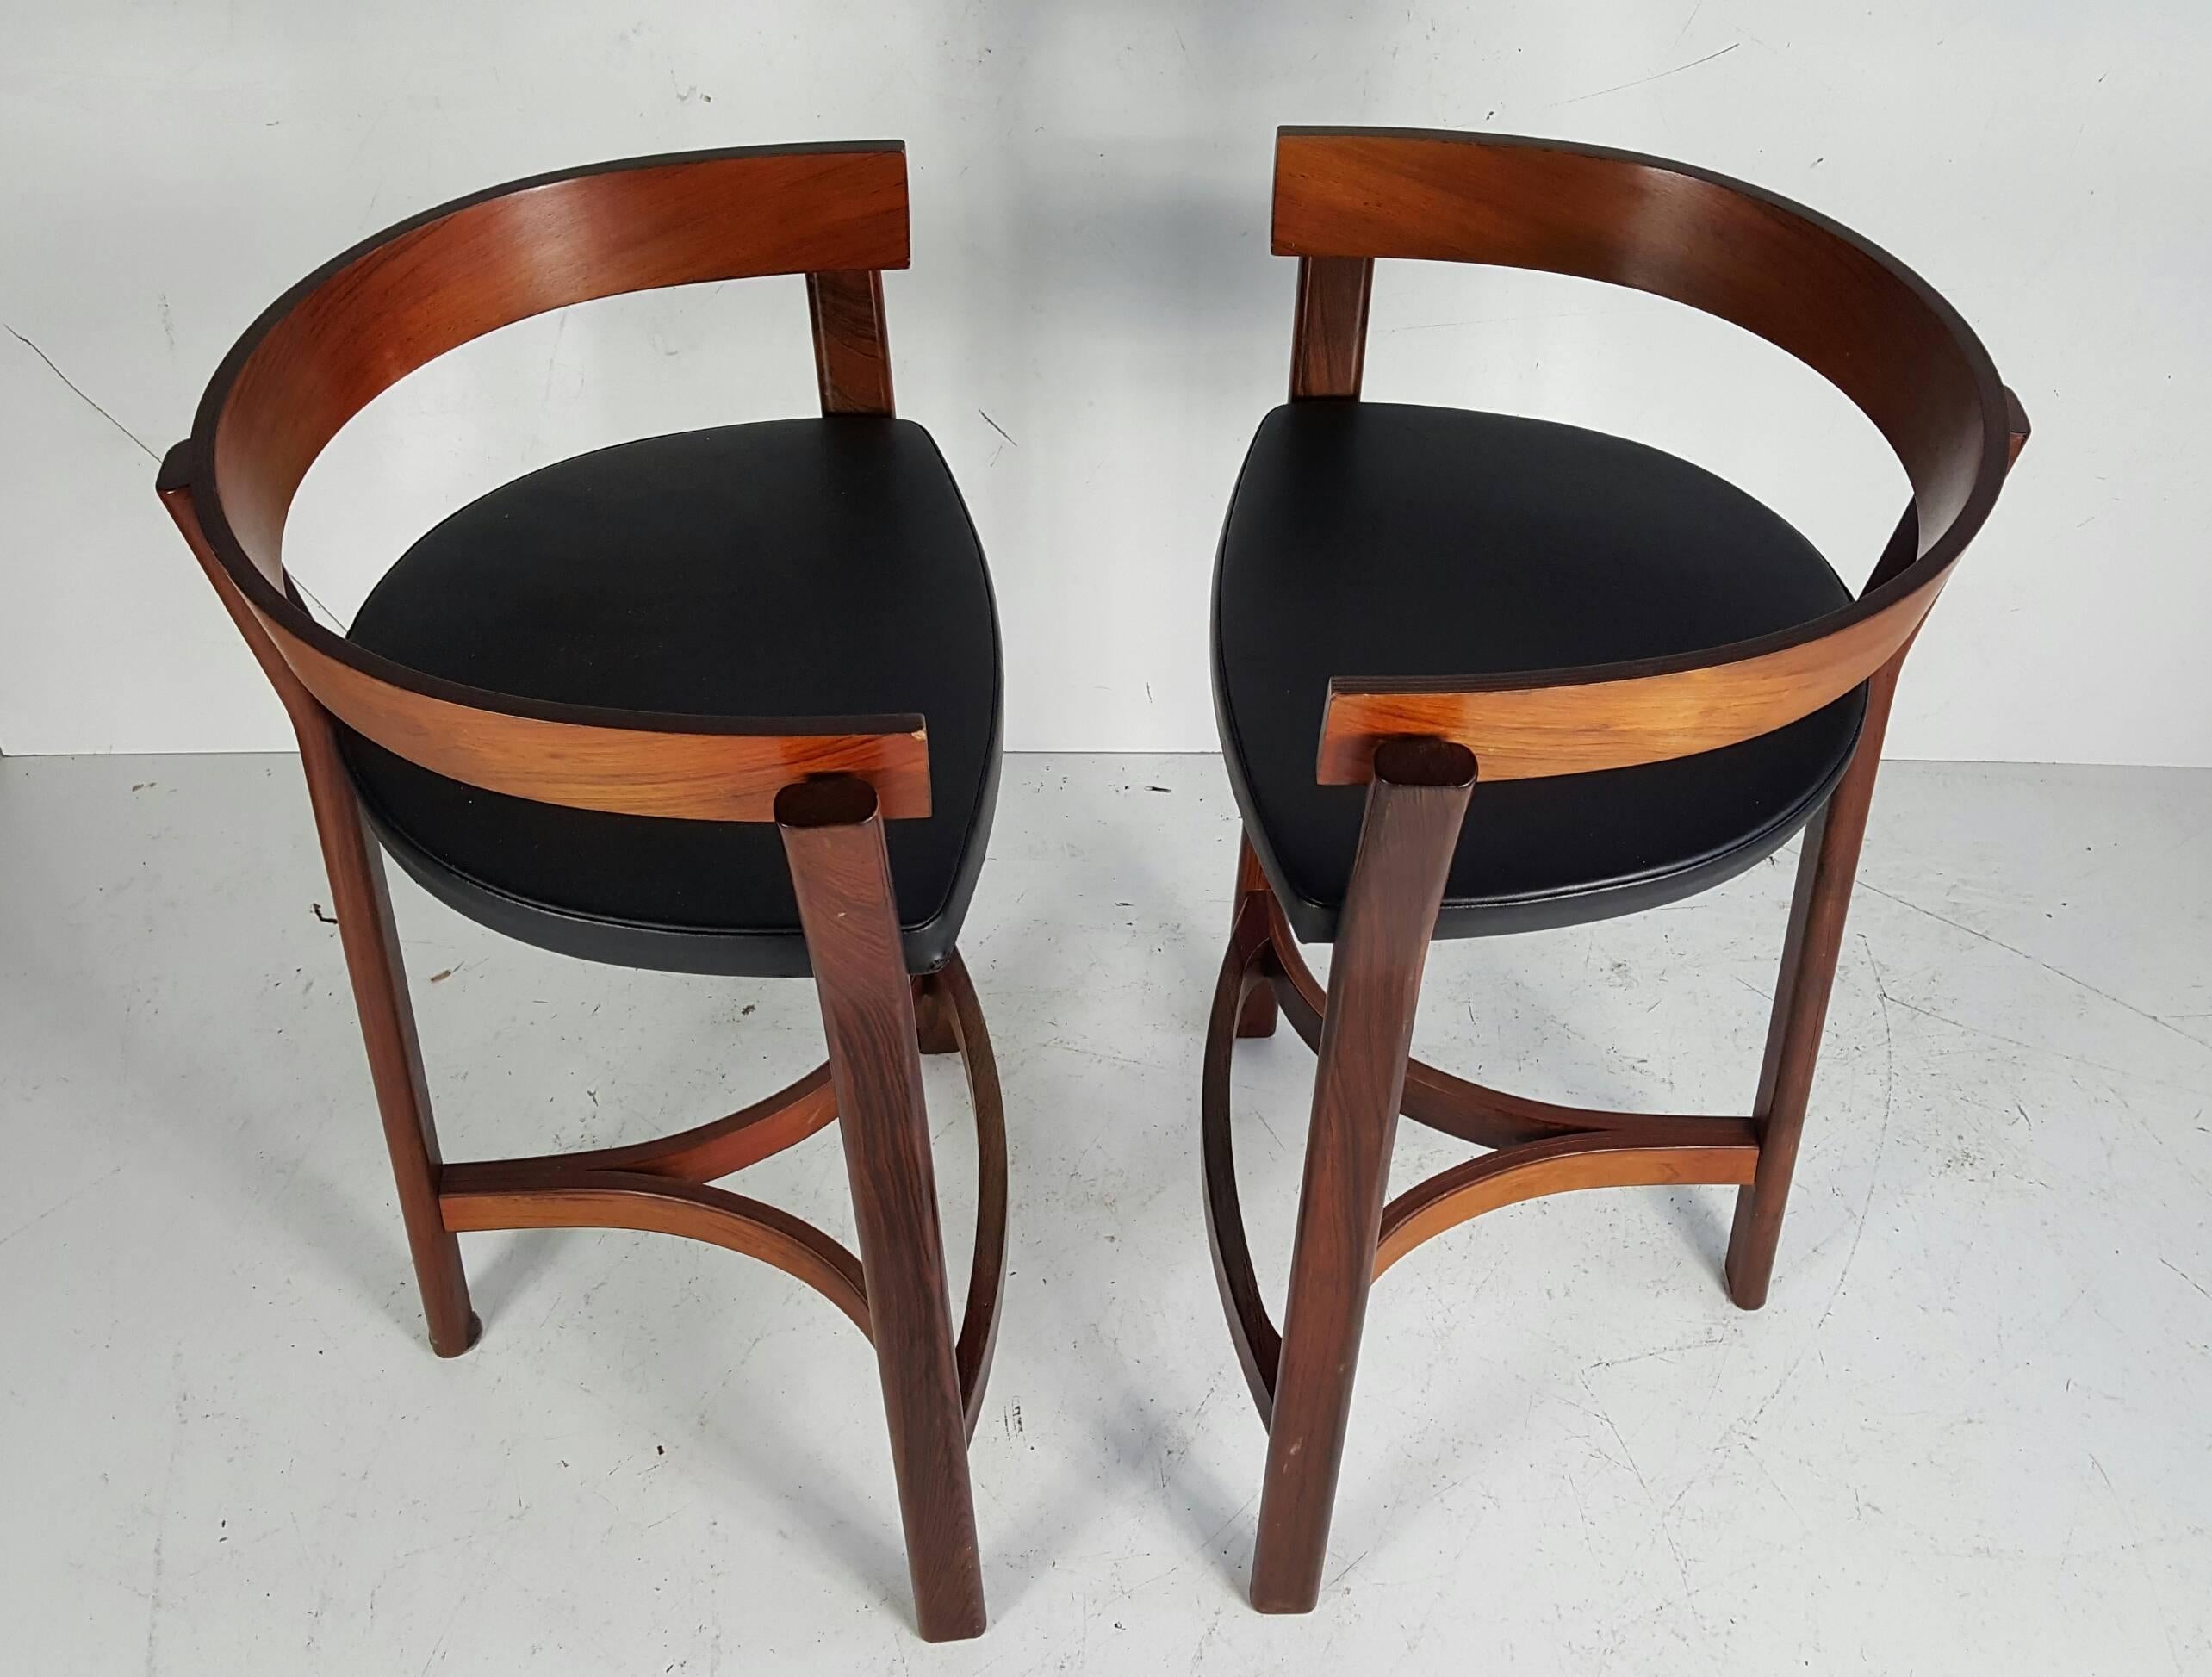 A nice vintage pair of barstools by Eric Buck for OD Mobler Denmark. Produced in solid rosewood with foot rests. Manufacturer labels to both.